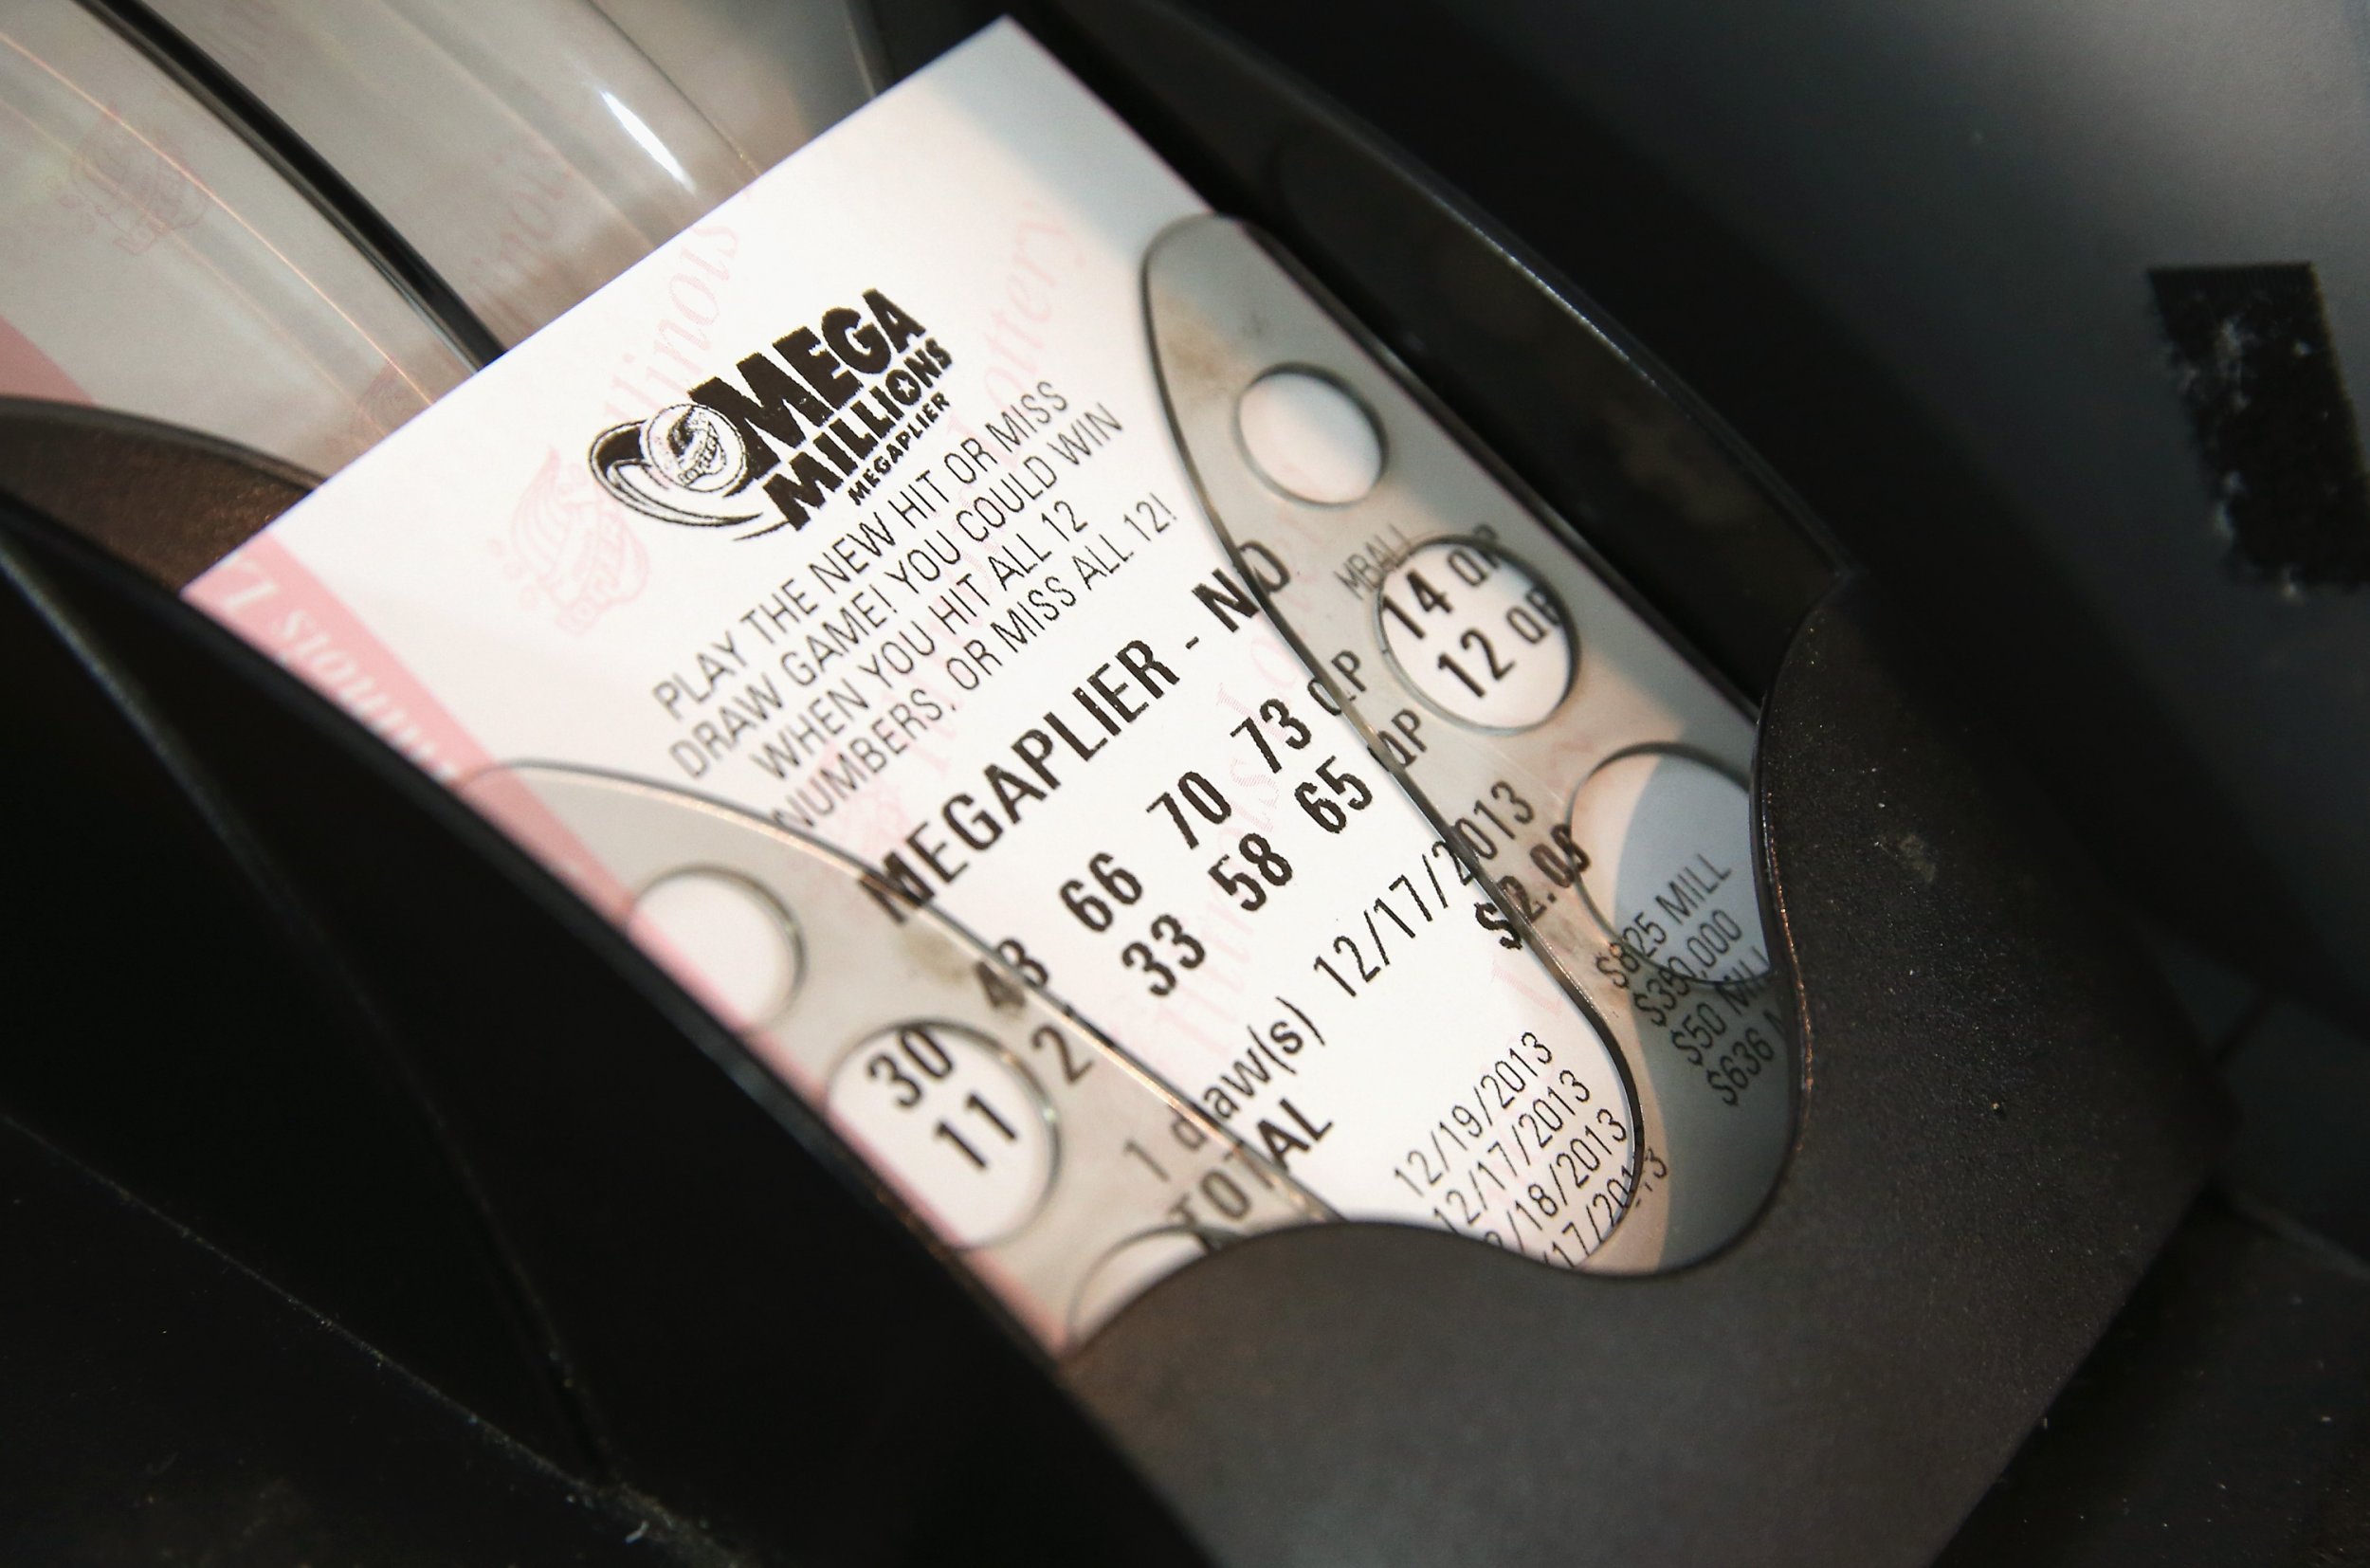 Mega Millions January 15 When Is The Drawing For 55 Million Jackpot?